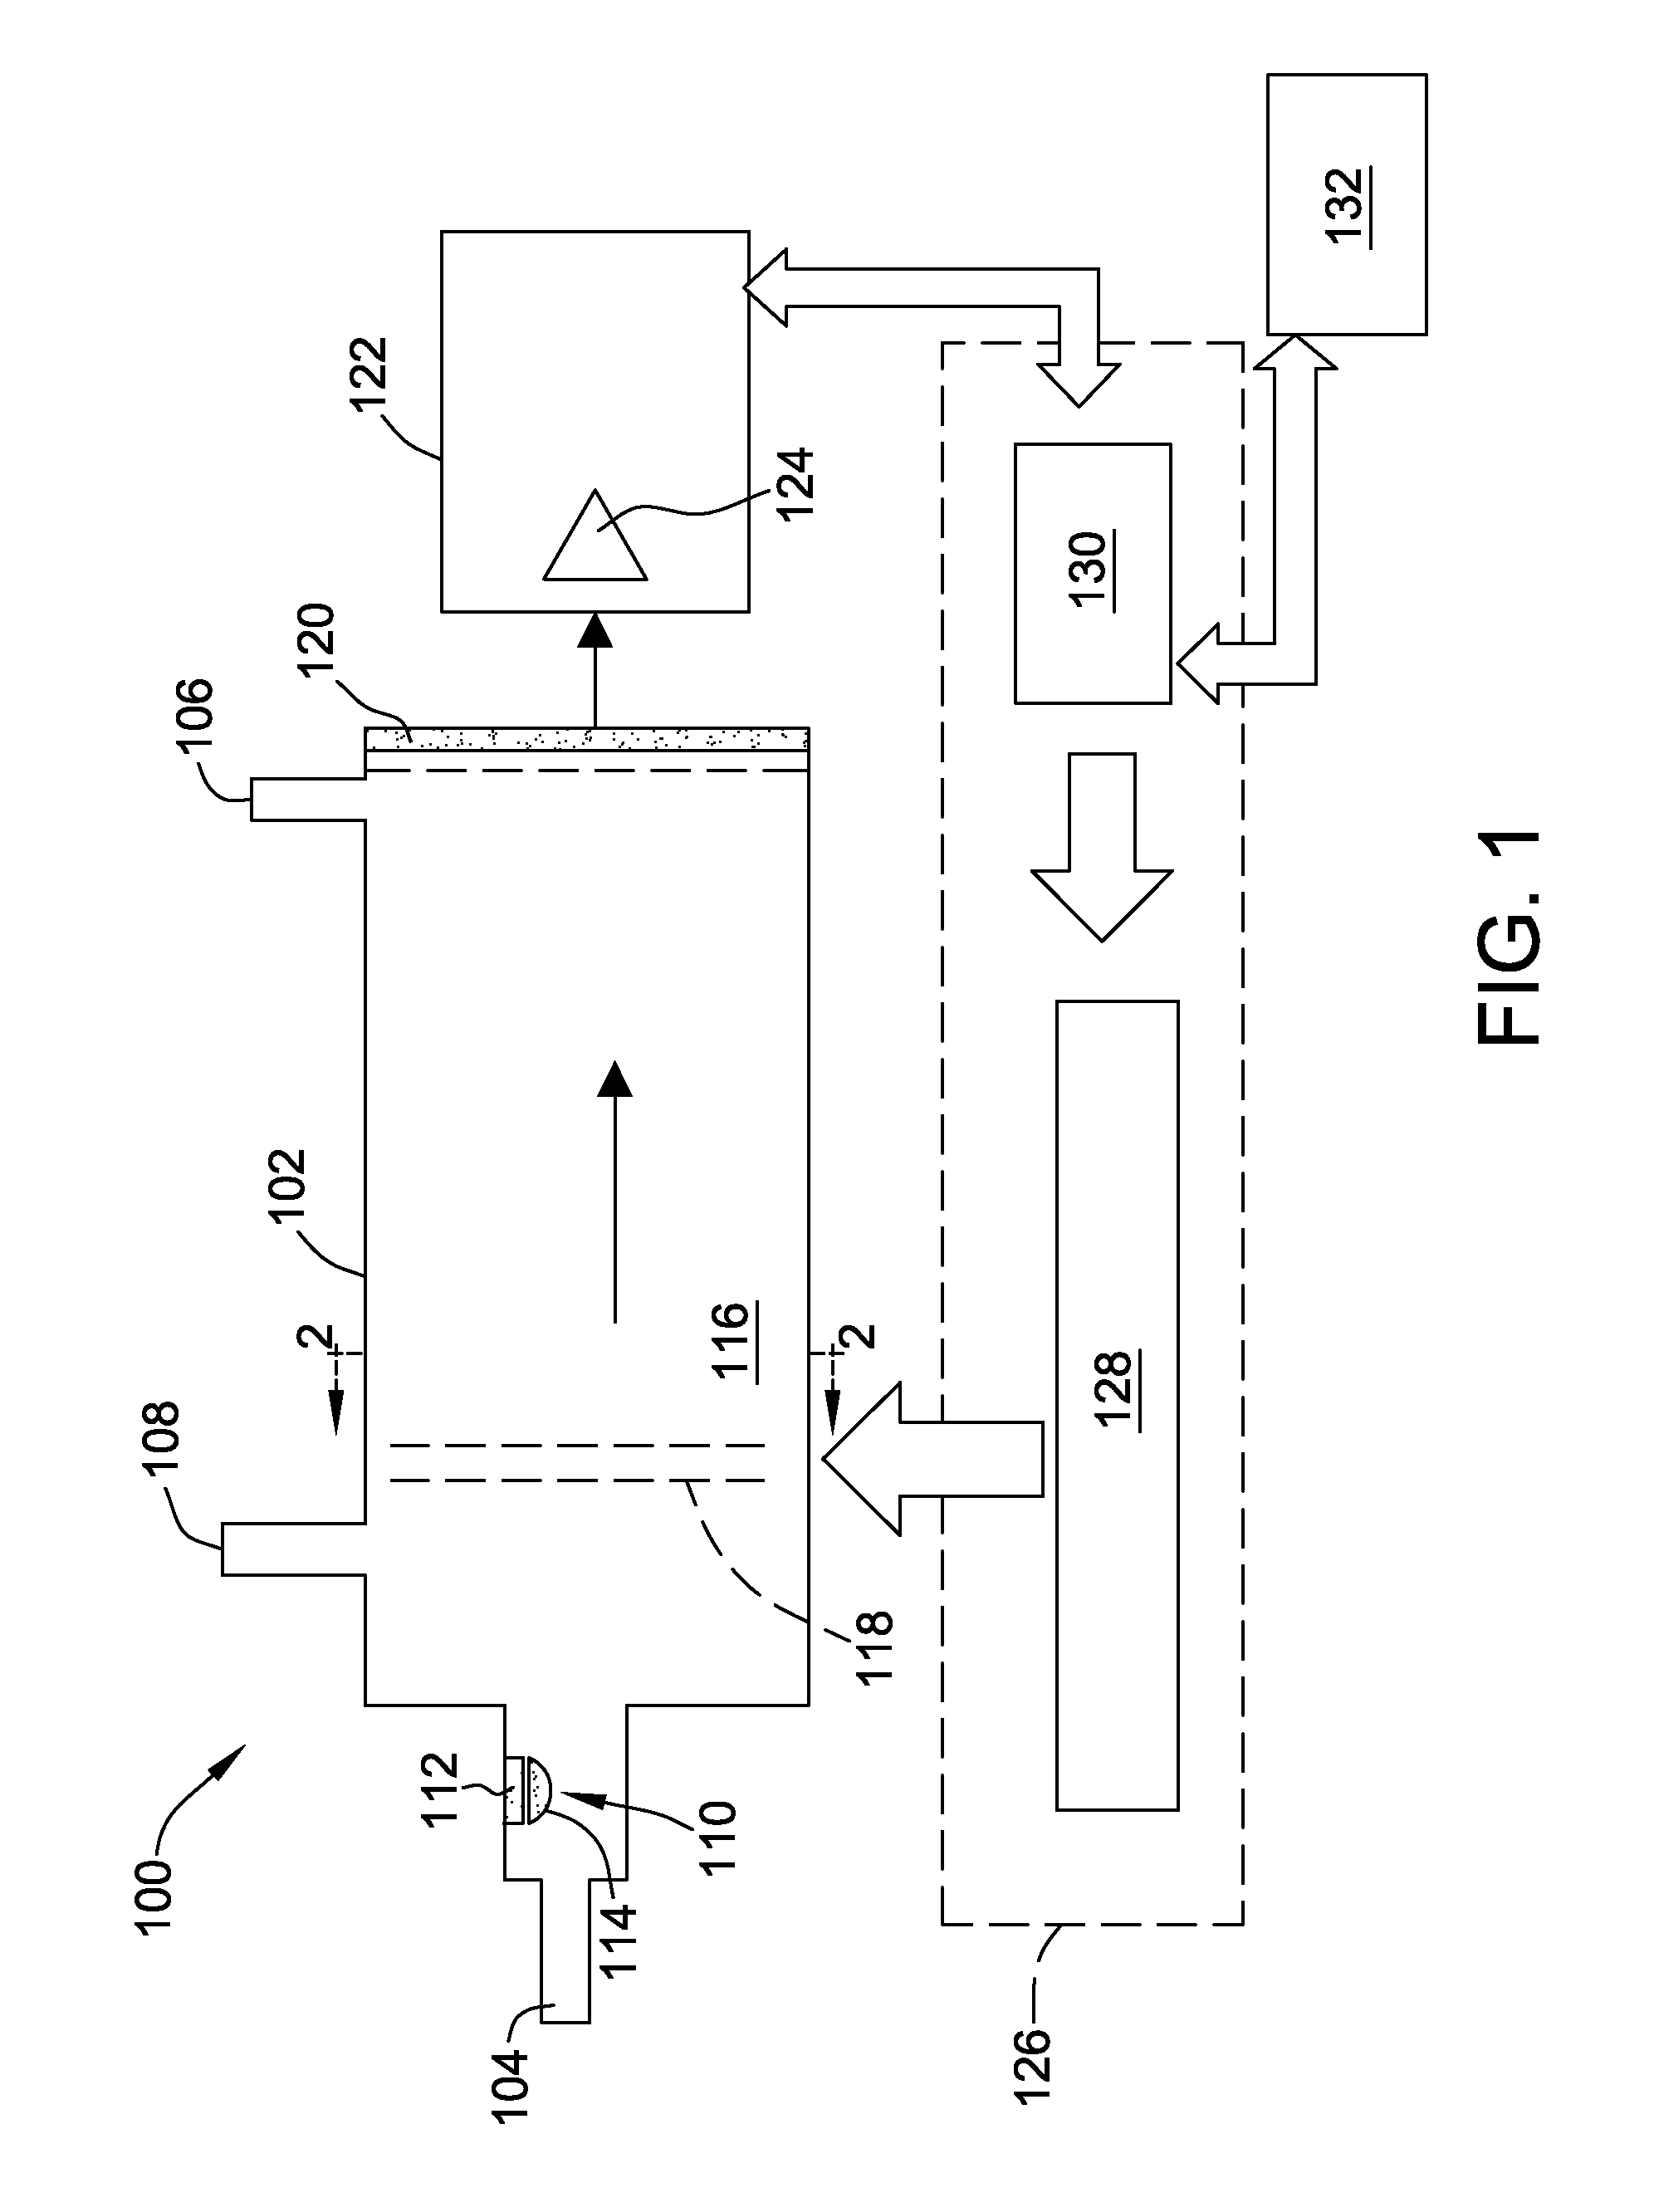 Ion mobility spectrometer and method of using the same